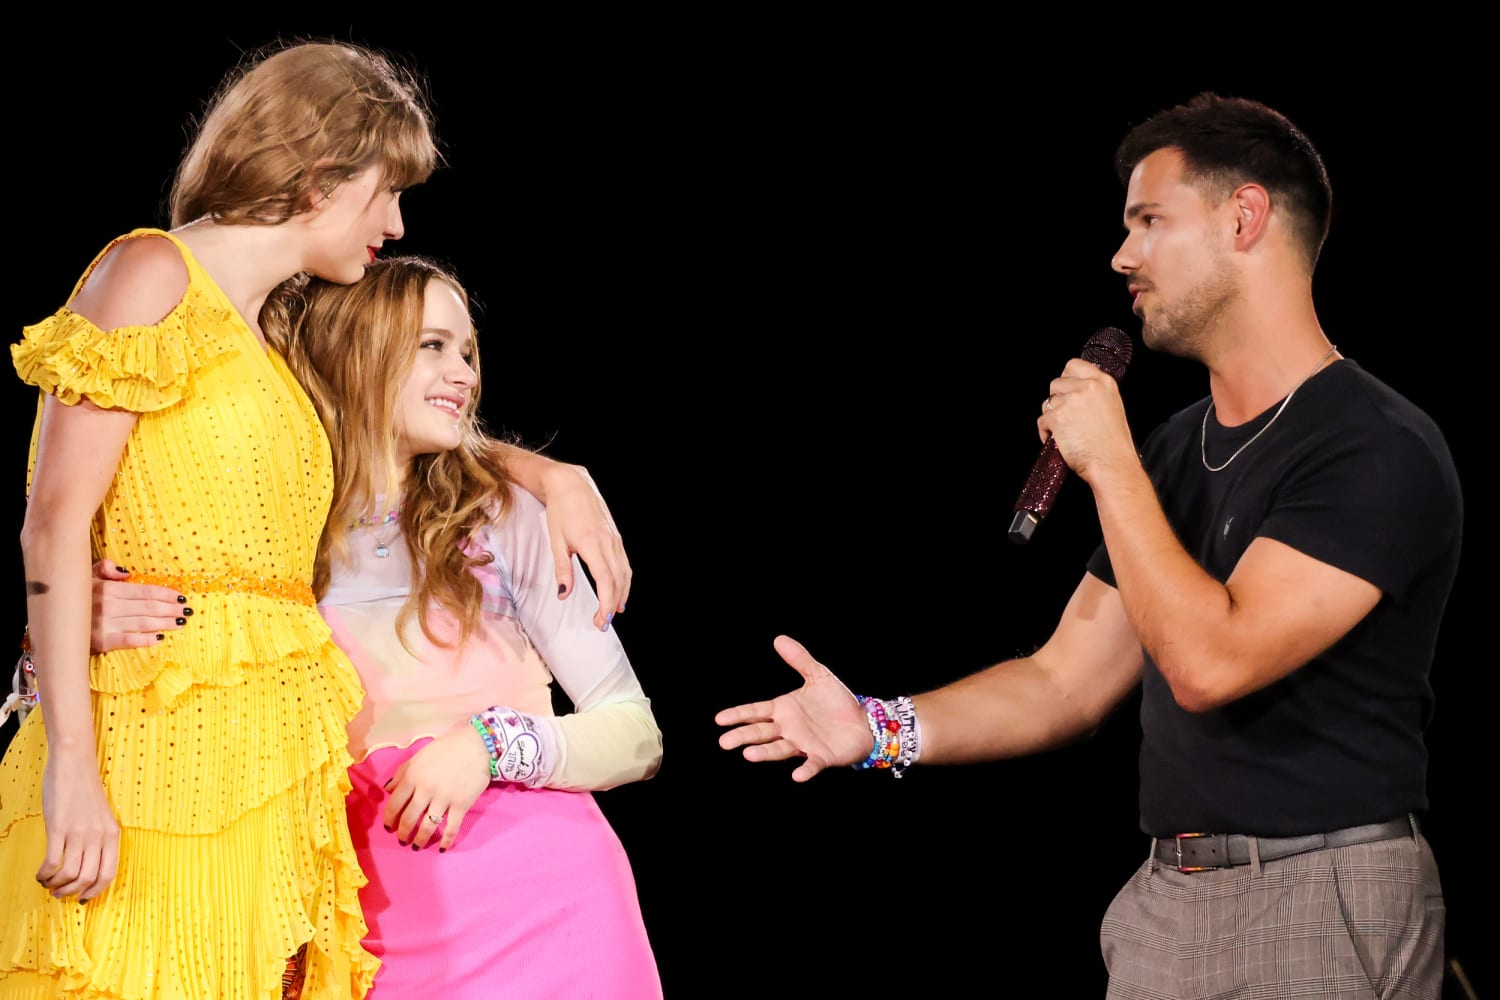 The internet is obsessed with Taylor Swift's friendship with Taylor Lautner and wife, Tay Lautner